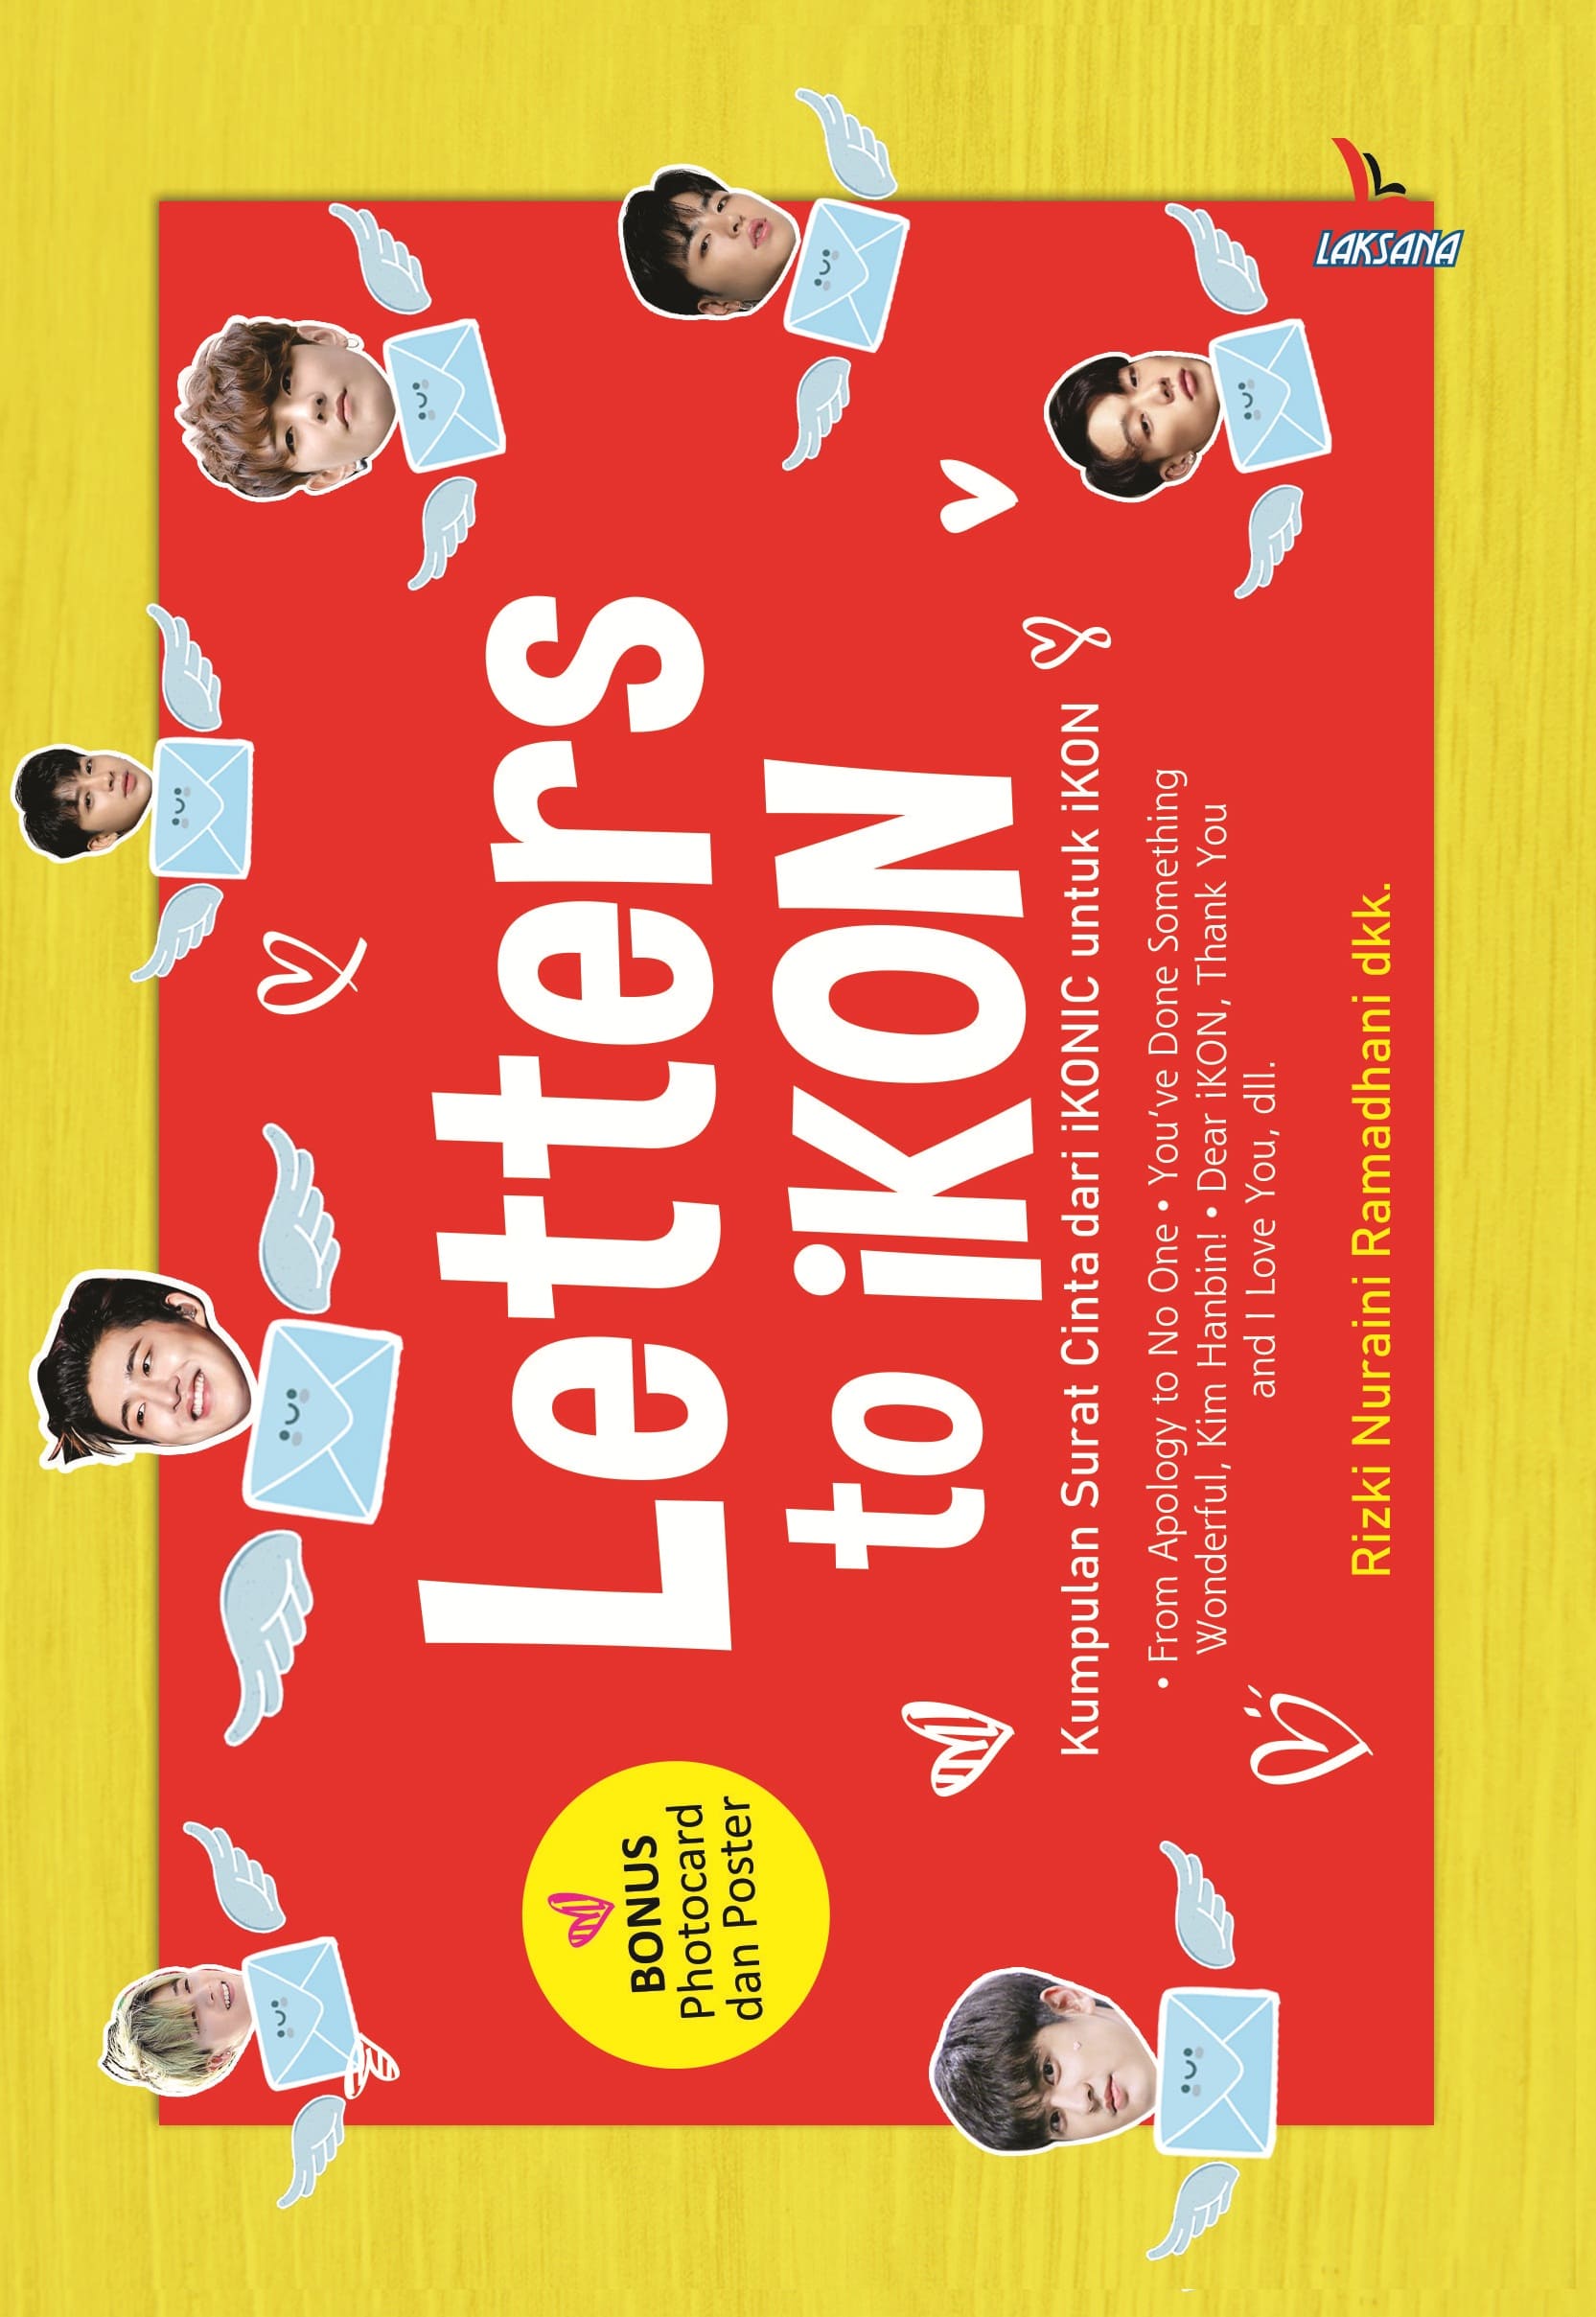 Letters to ikon